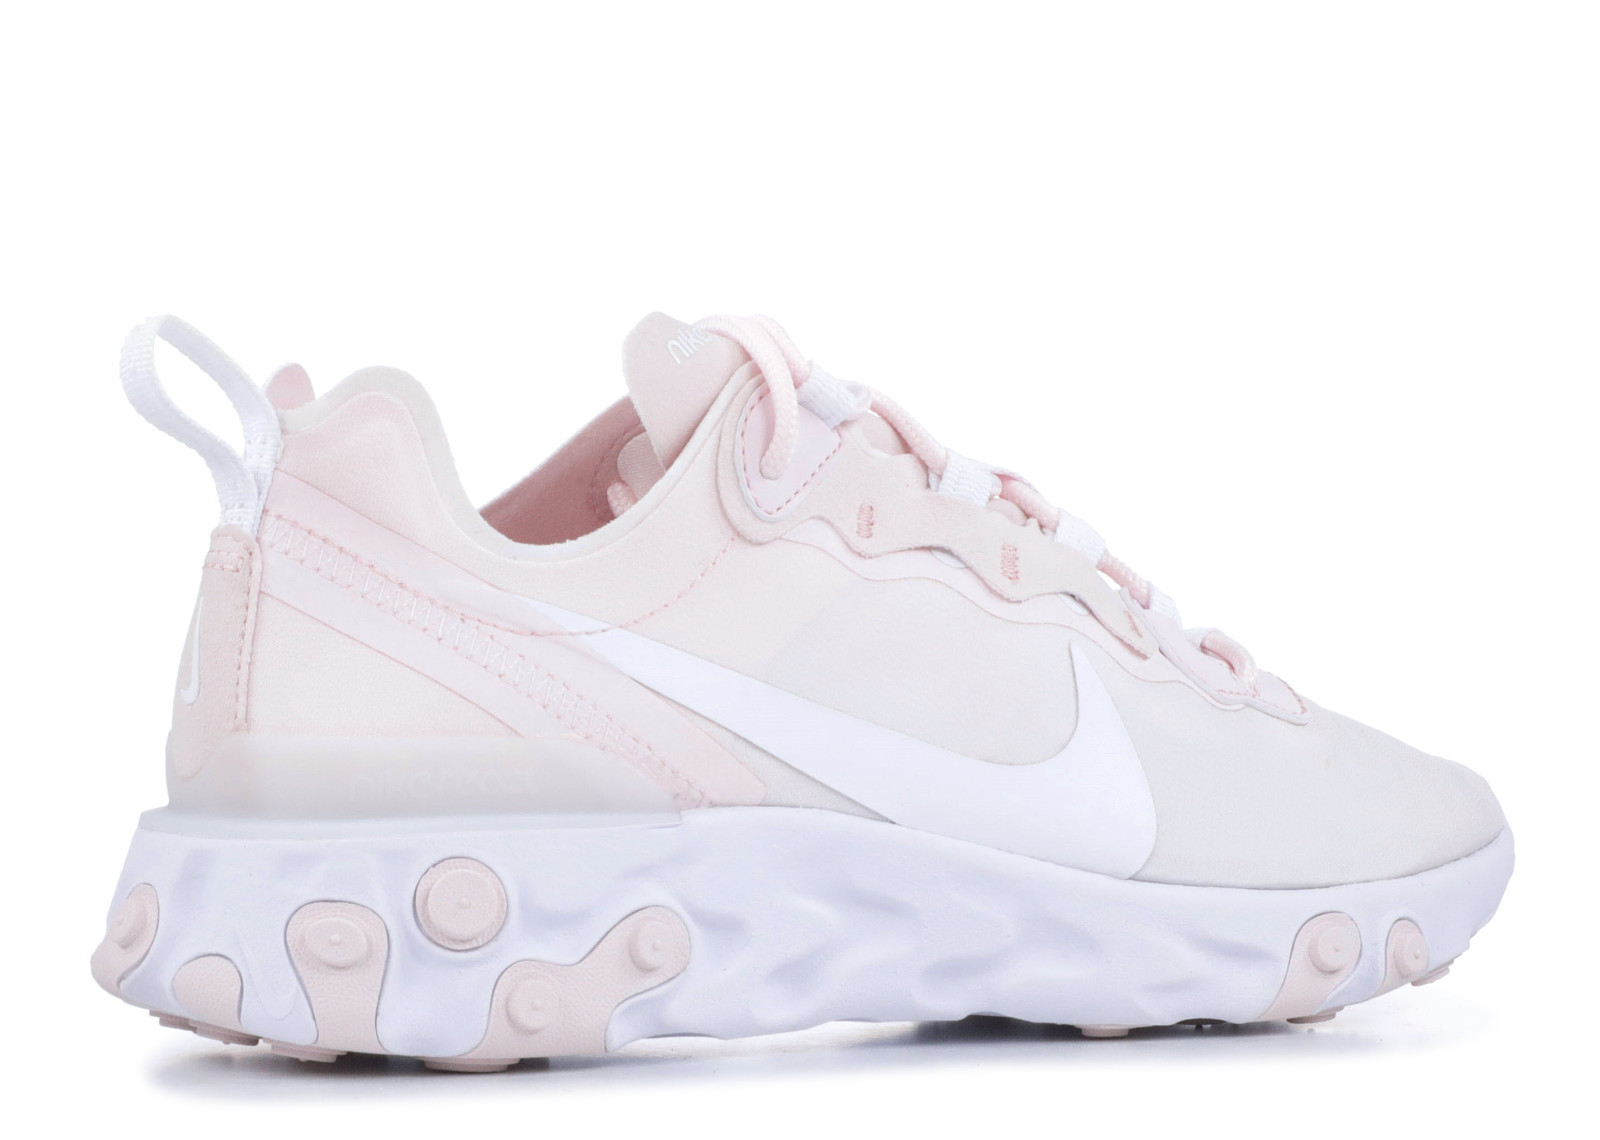 ELEMENT REACT 55 W "PALE PINK" image 3